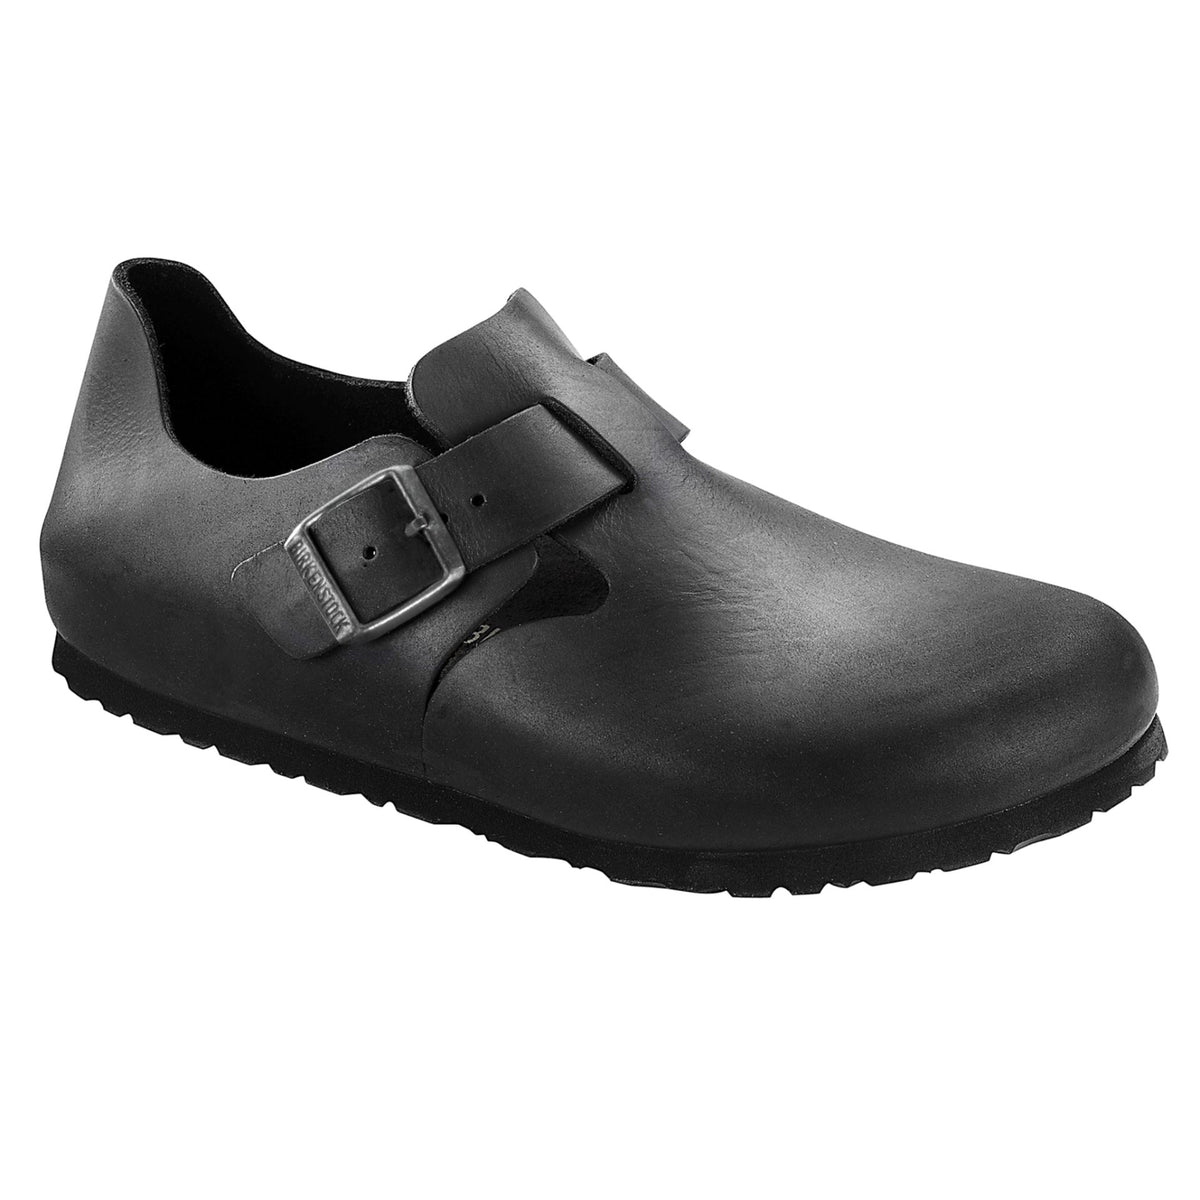 Birkenstock Shoes, London, Oiled Leather, Narrow Fit, Black Shoes Birkenstock Shoes Black 35 